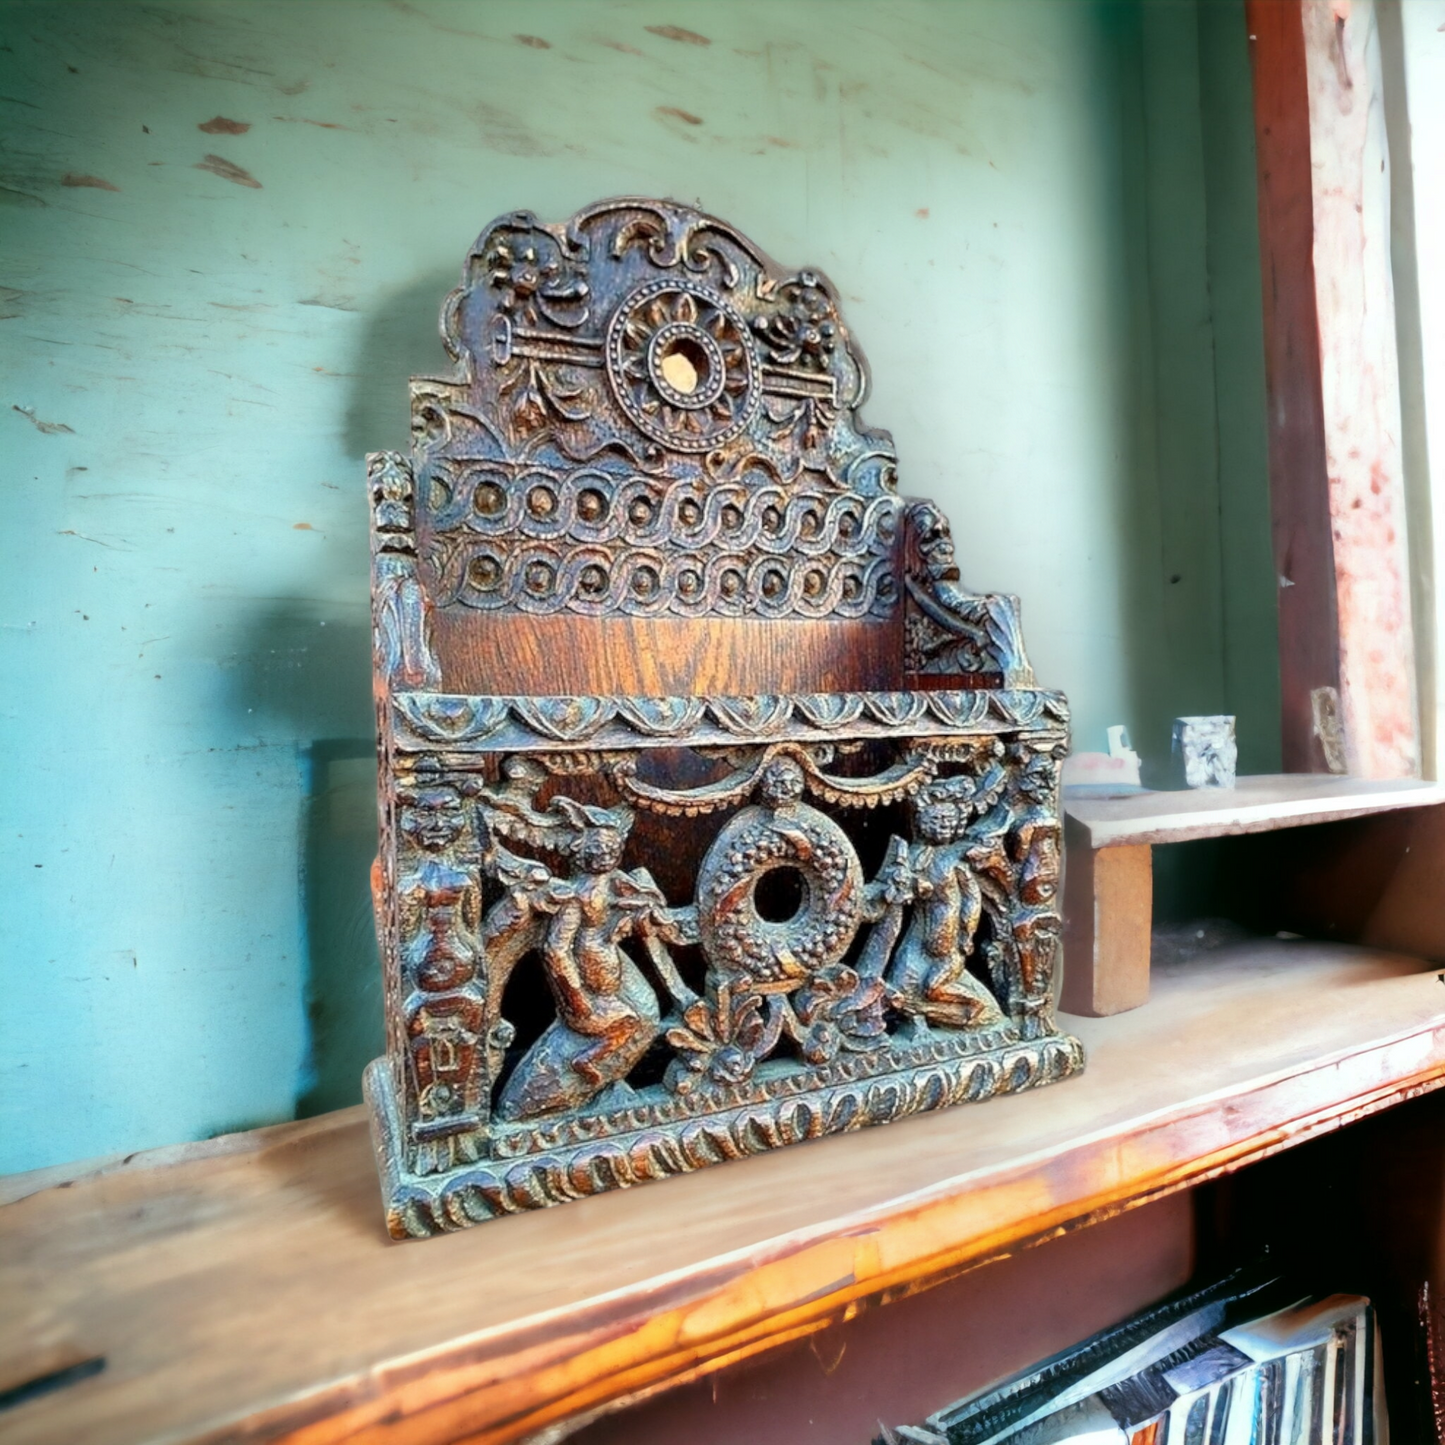 17th Century Style, 19th Century Made, English Antique Carved Oak Letter Rack Dated "1895"